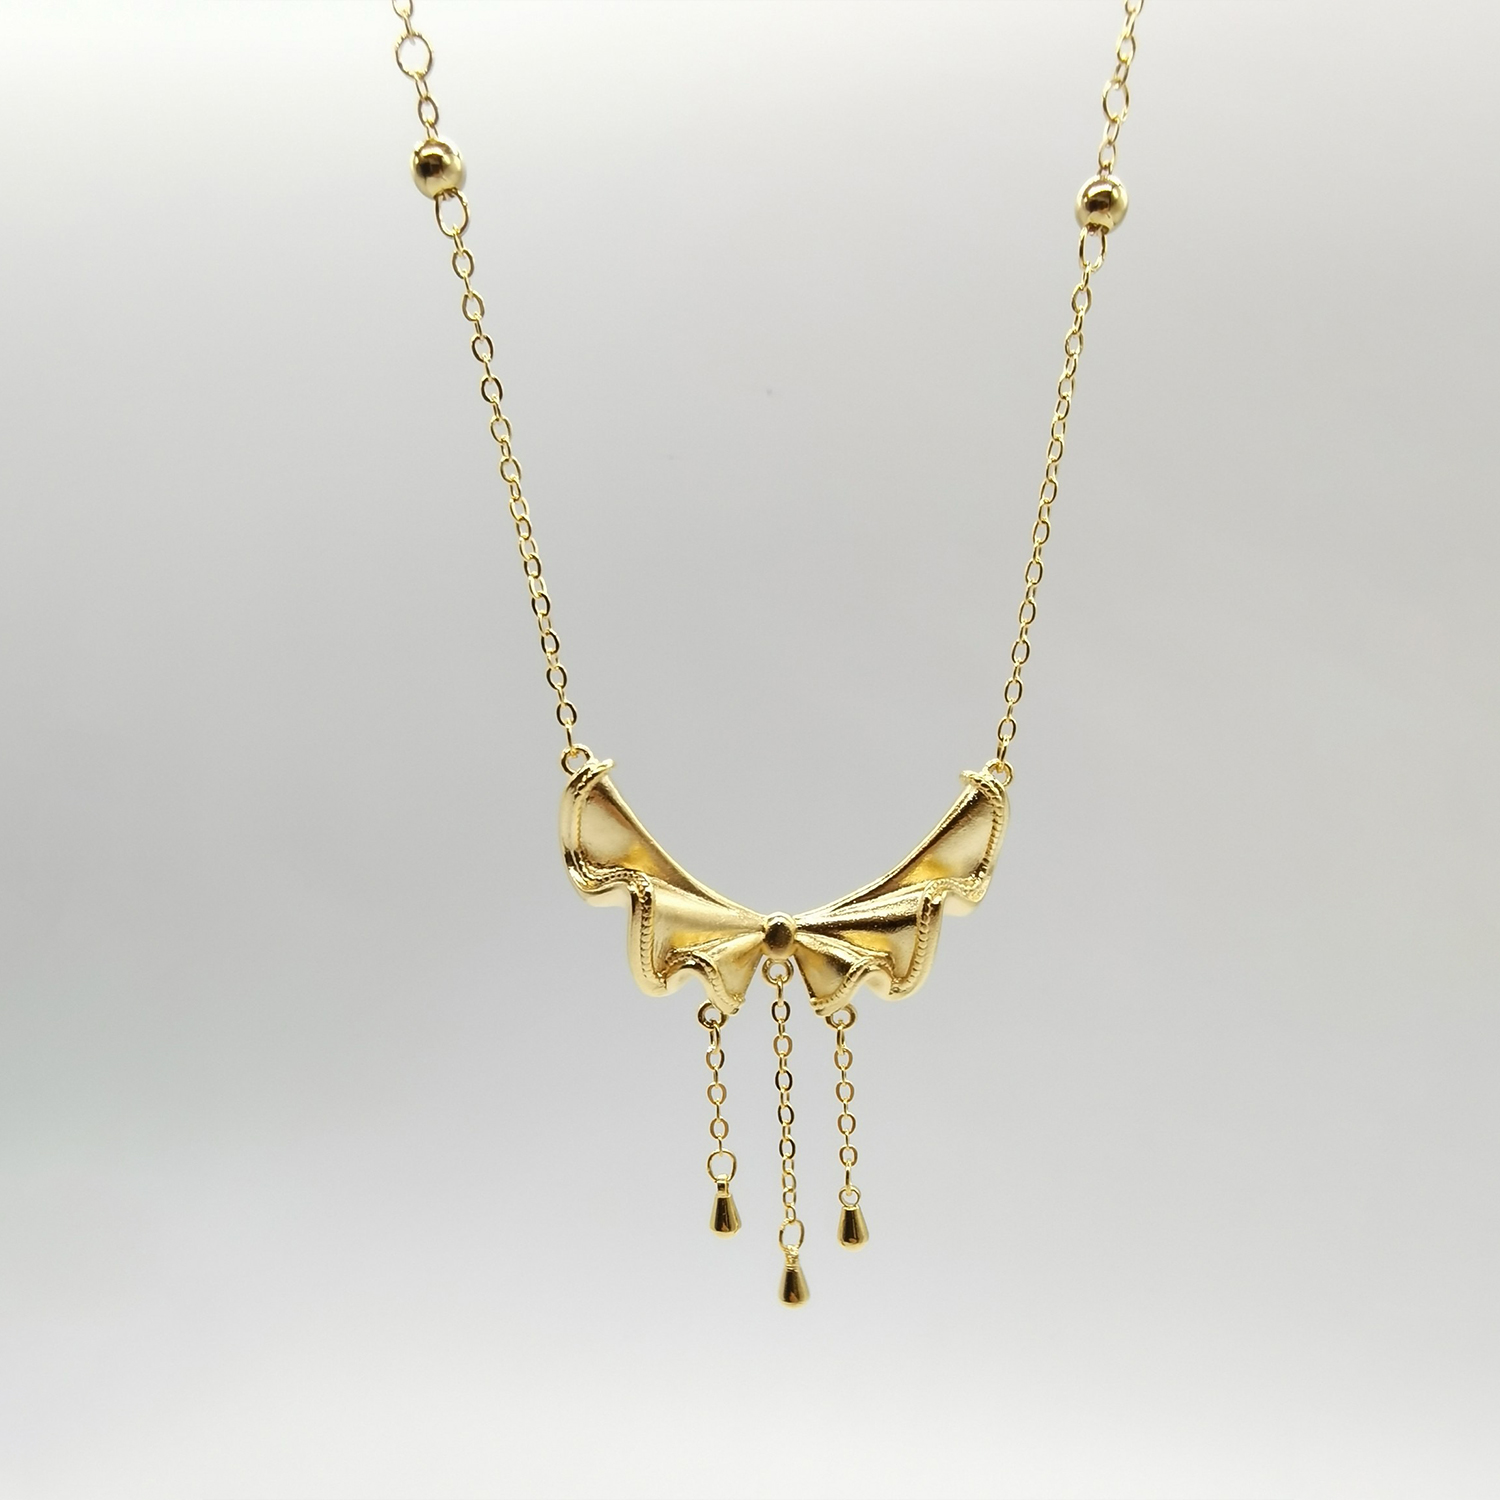 Alluvial gold vacuum electroplating 24K gold bow tassel necklace